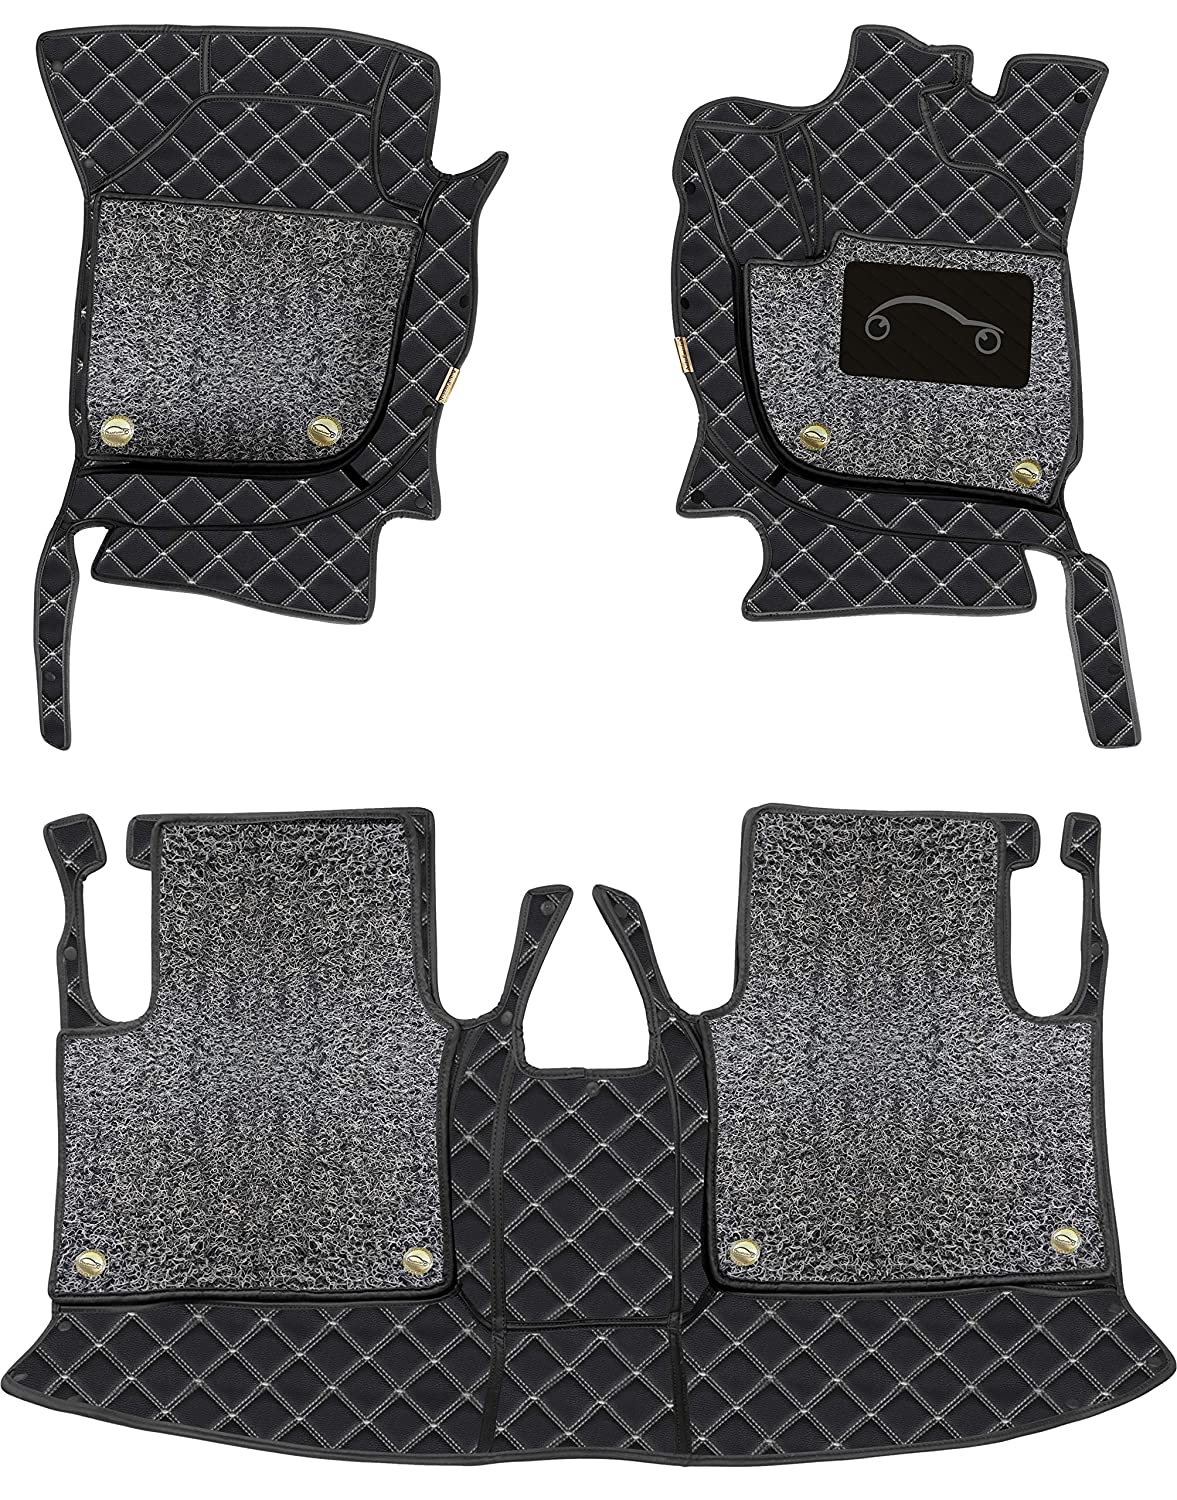 Ford Endeavour 2011-16-7D Luxury Car Mat, All Weather Proof, Anti-Skid, 100% Waterproof & Odorless with Unique Diamond Fish Design (24mm Luxury PU Leather, 2 Rows)